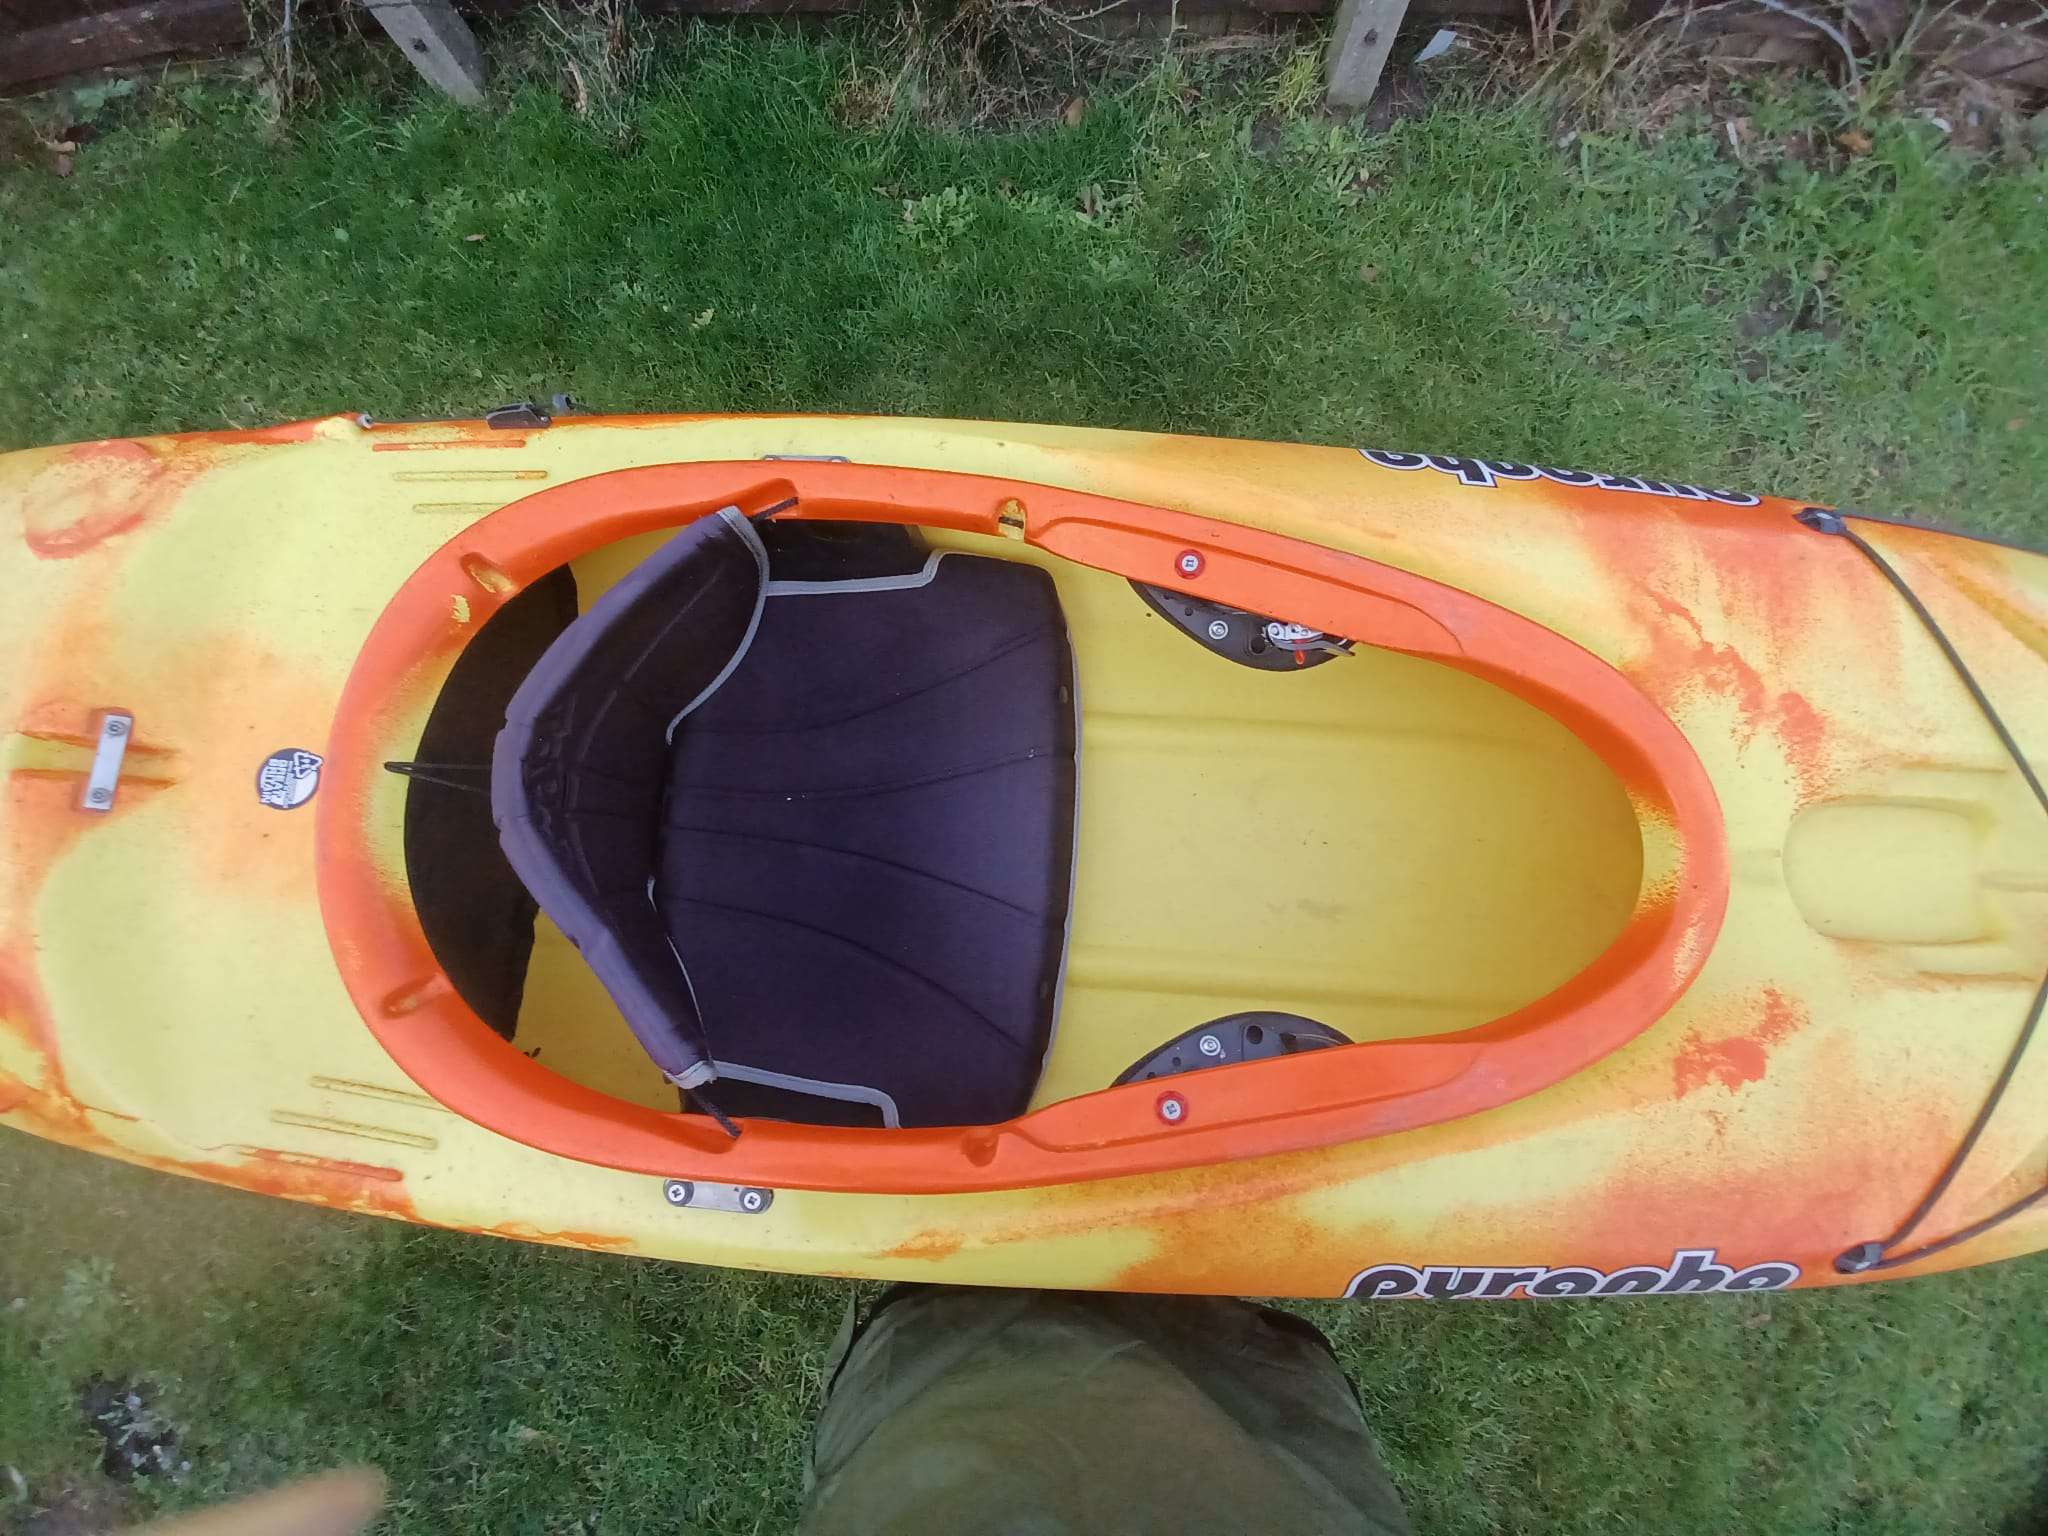 A yellow and orange kayak on grass

Description automatically generated